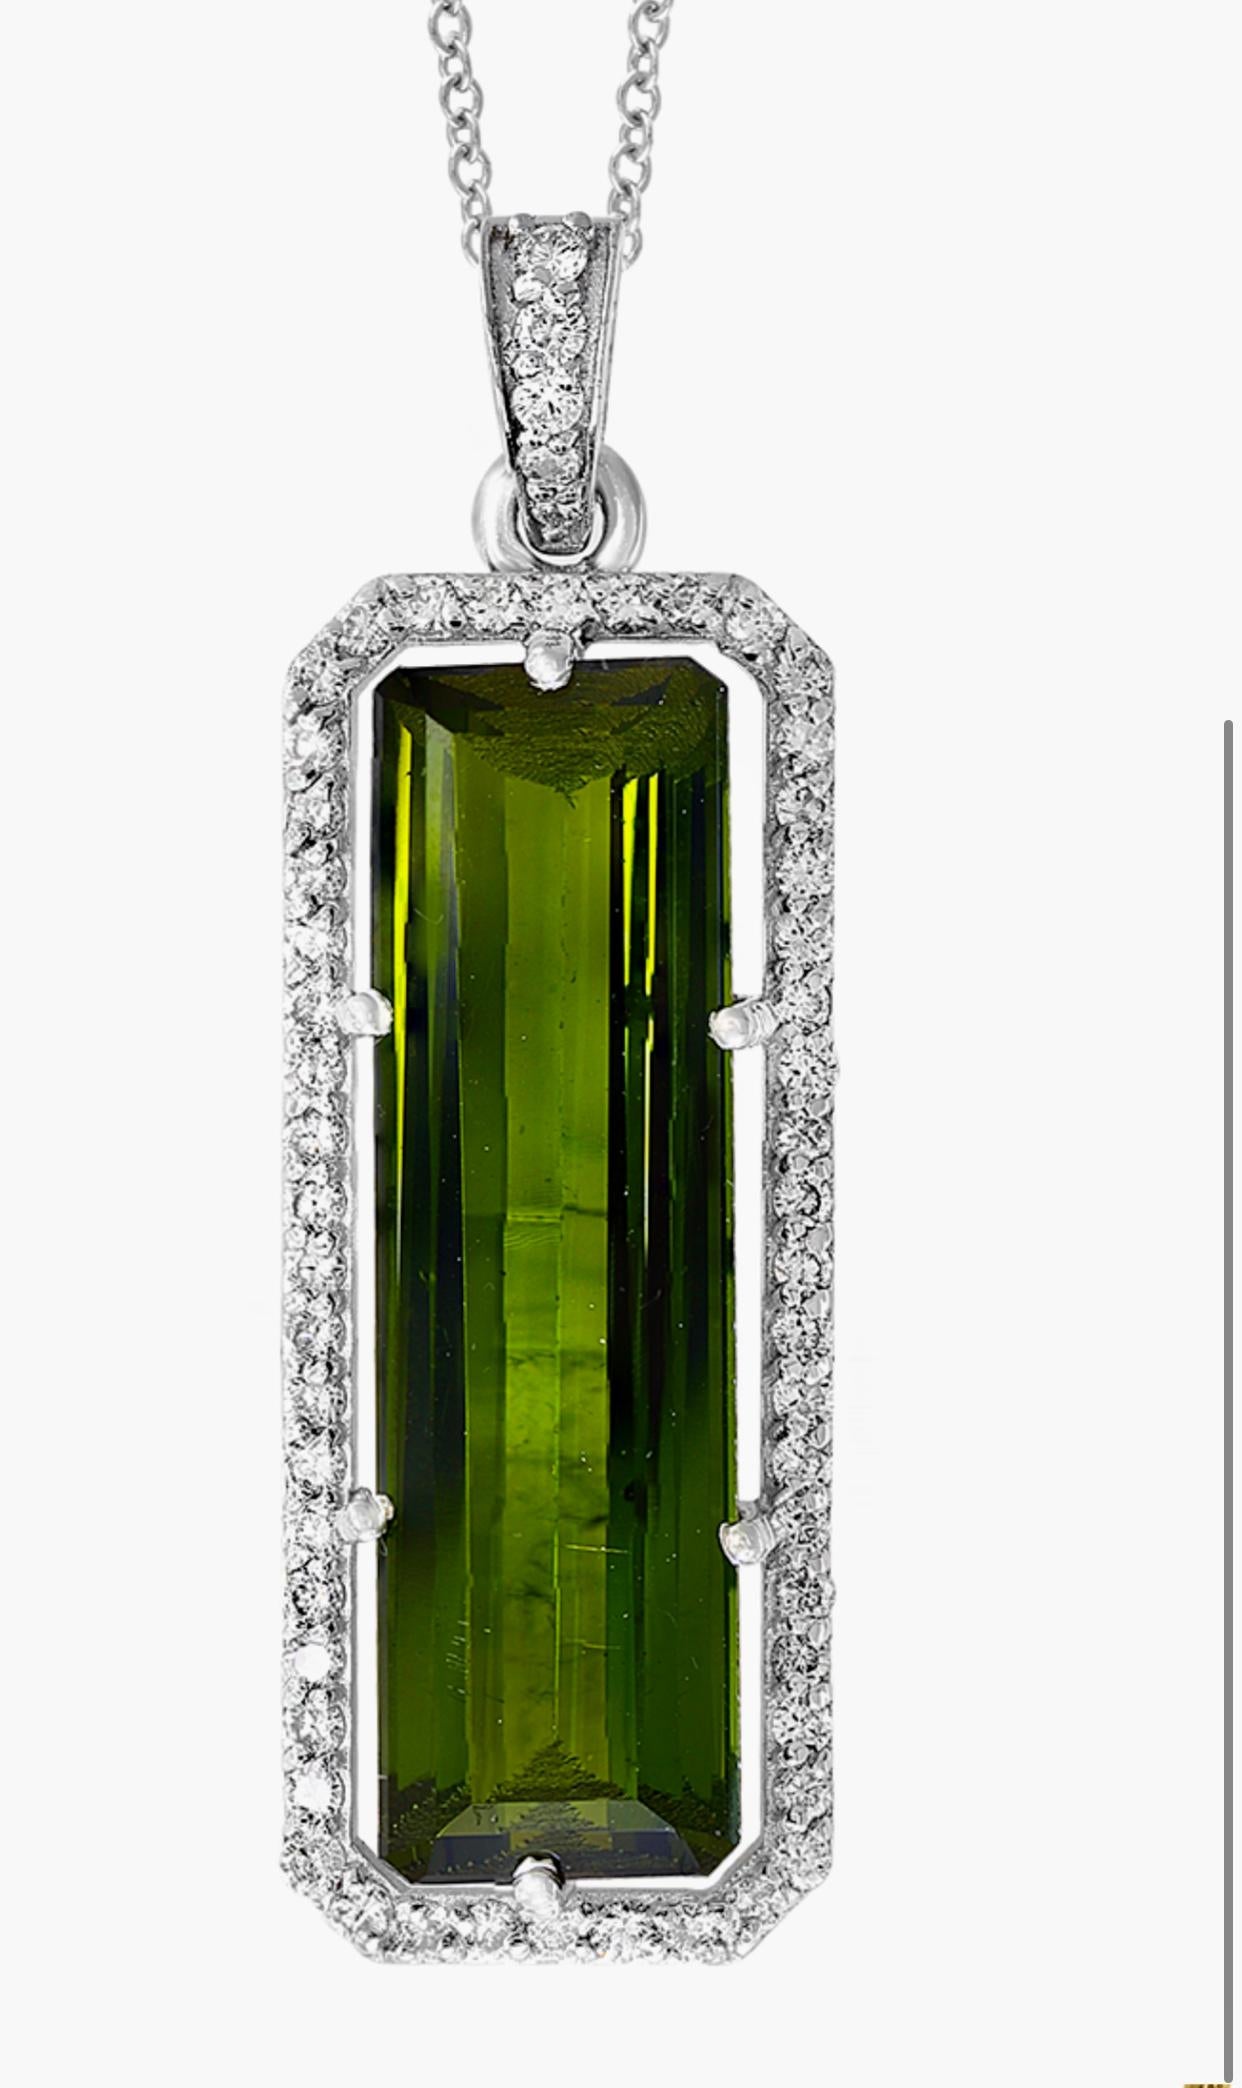  Approximately  15  Carat Green Tourmaline  & Diamond Pendant /  Necklace 18 Karat  Gold.
This spectacular Pendant Necklace  consisting of a single long Cushion  Shape Green Tourmaline  15  Carat.  The  Green Tourmaline  is surrounded by